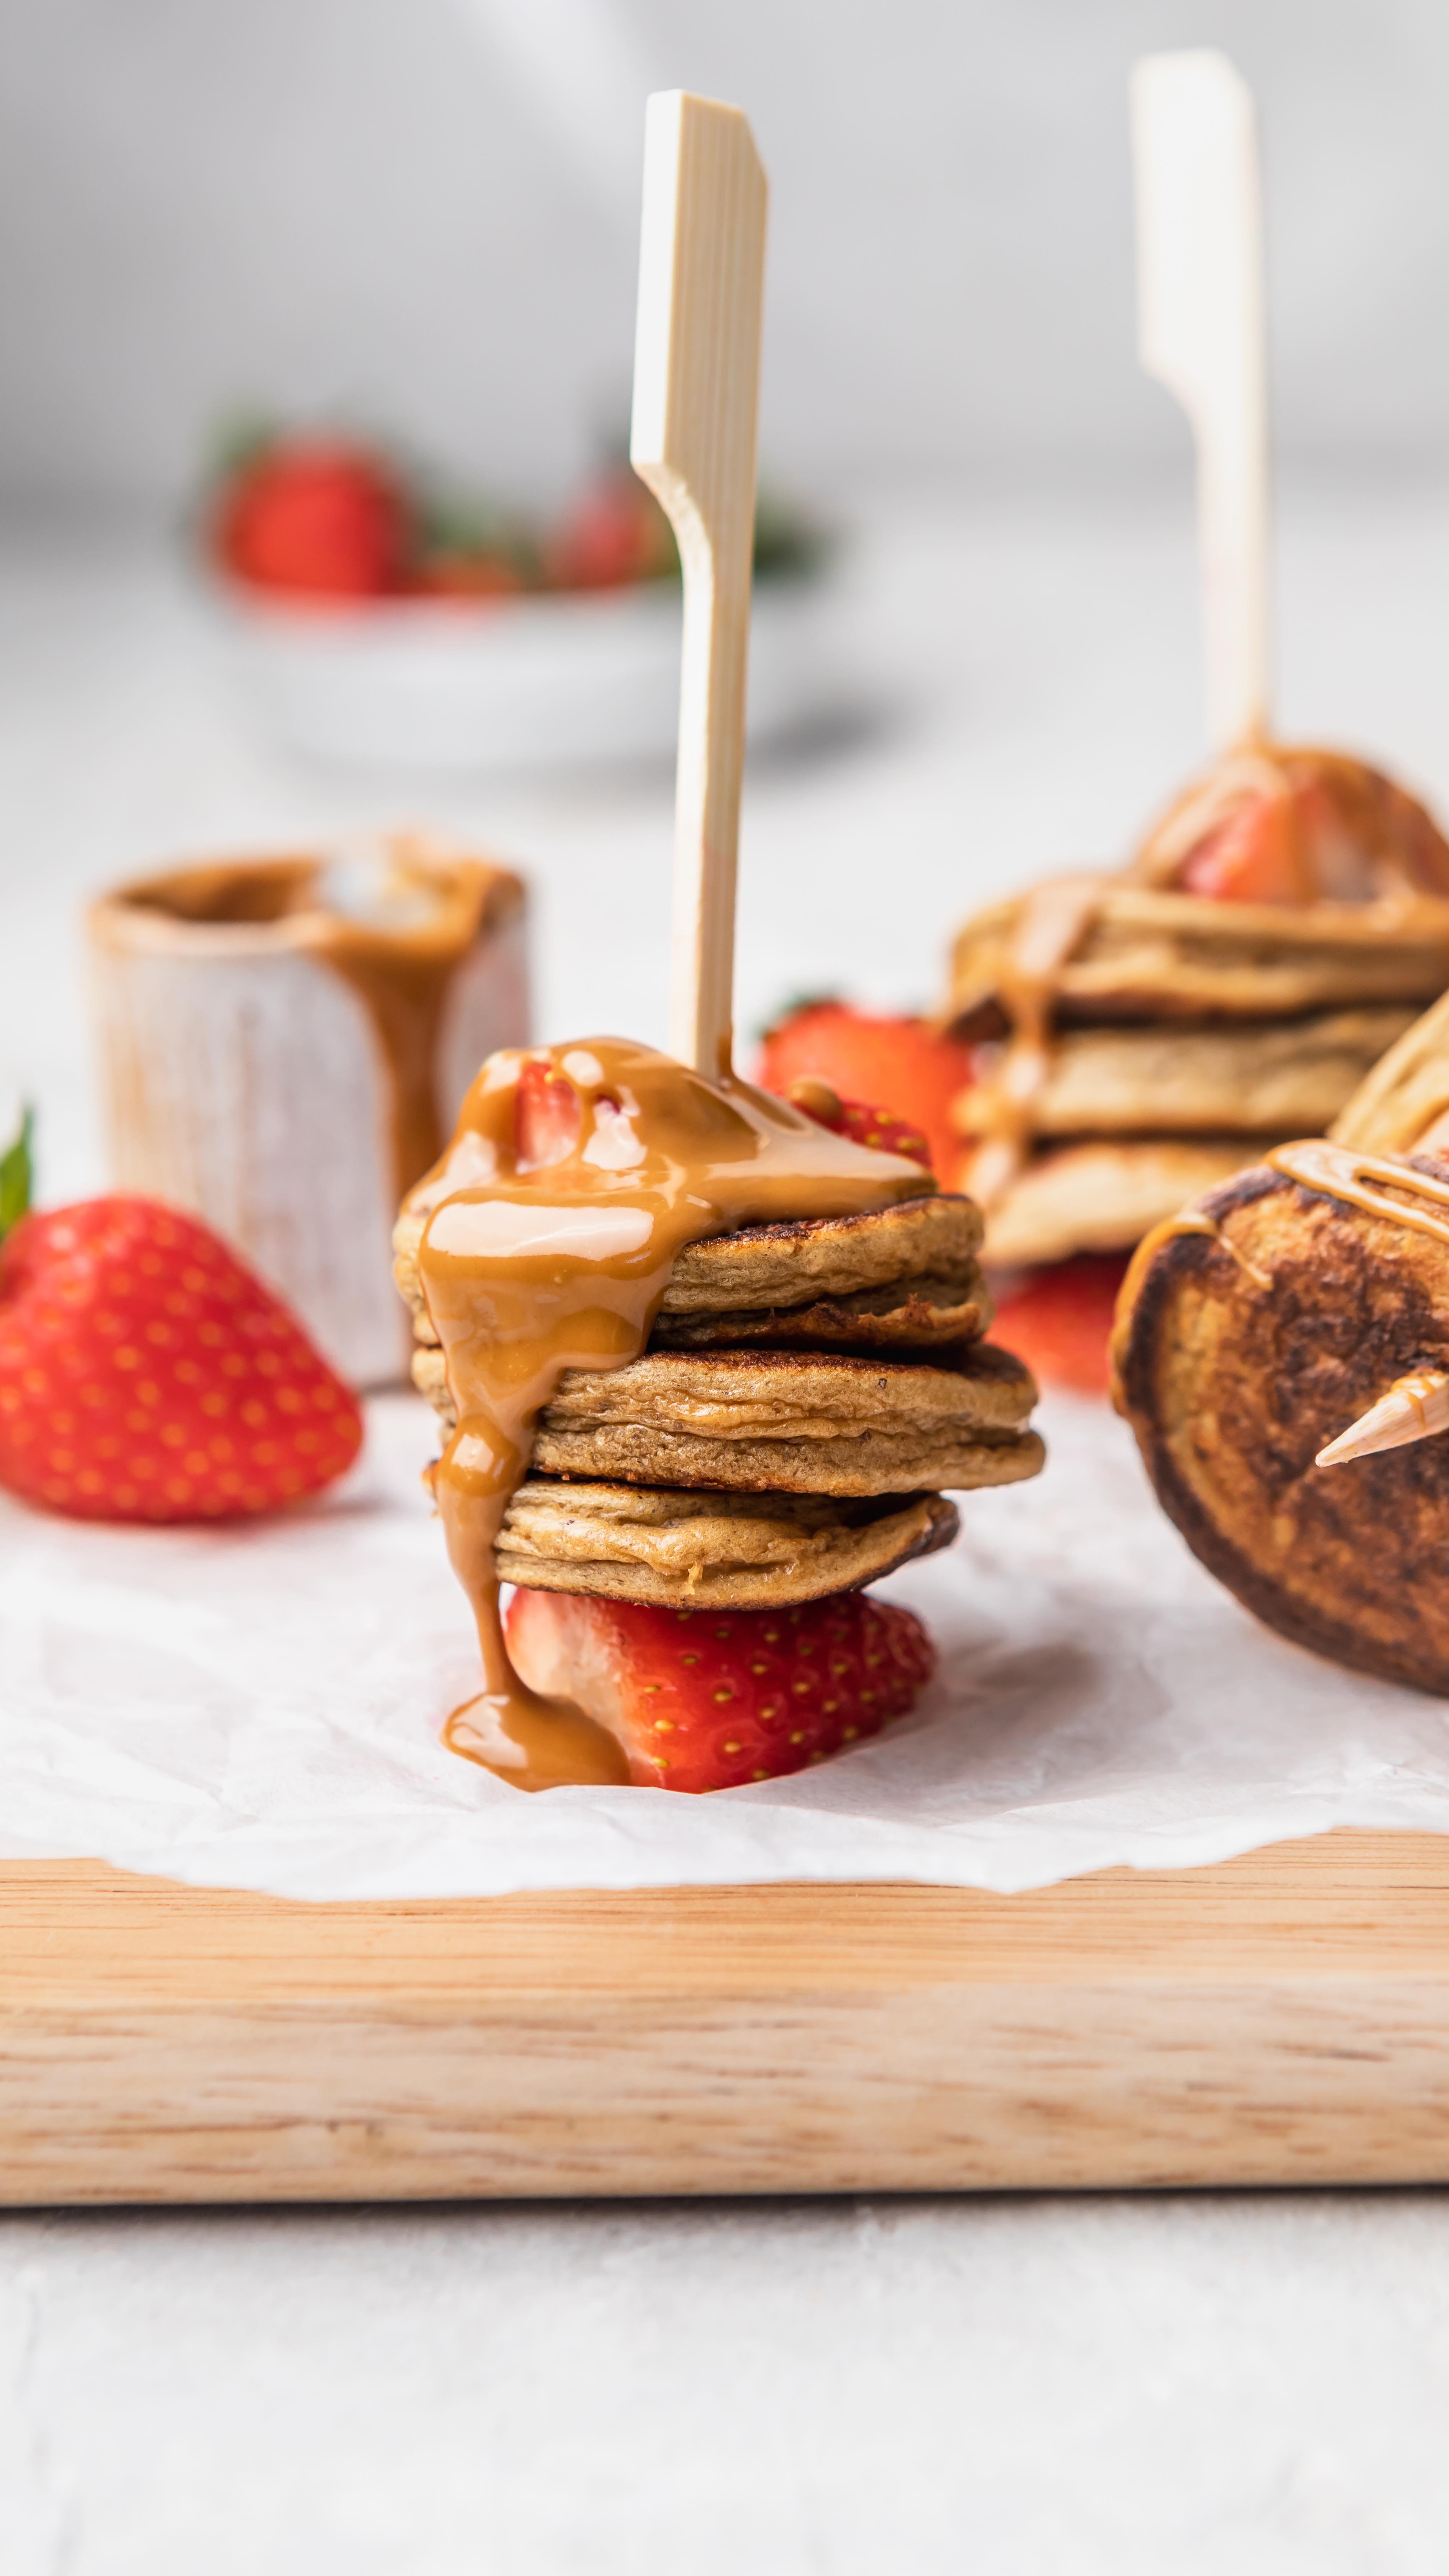 These Biscoff & Strawberry Pancake Skewers are the cutest breakfast idea! Using your usual pancake mix, create little discs, thread onto skewers with strawberries and drizzle over the Biscoff spread! Latest recipe created for @believe.bykimfrench 🙌🏻